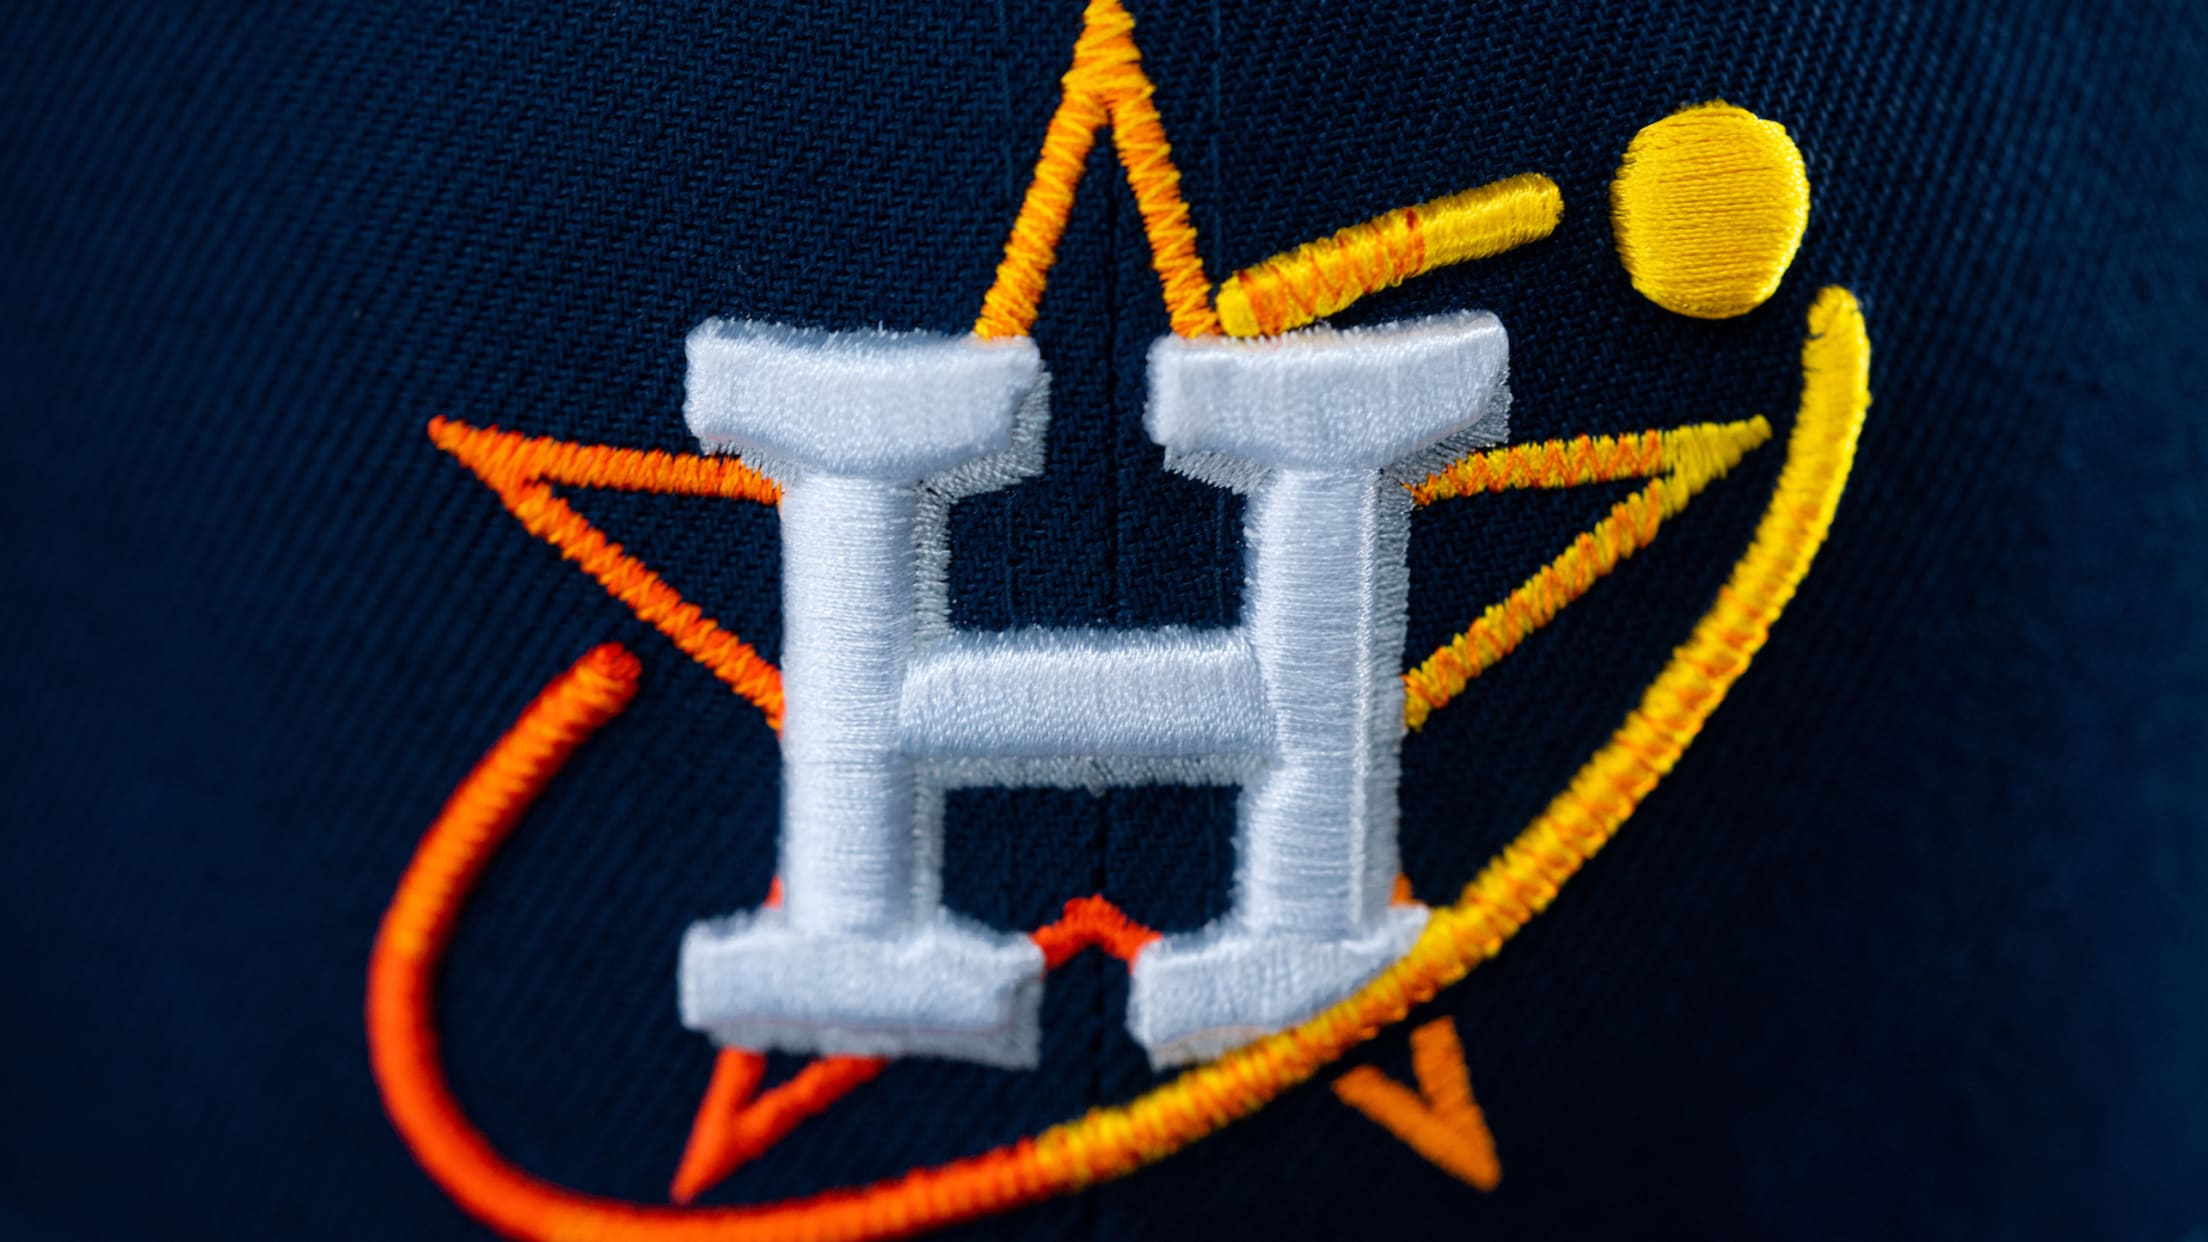 houston astros outfits for women space city jersey｜TikTok Search